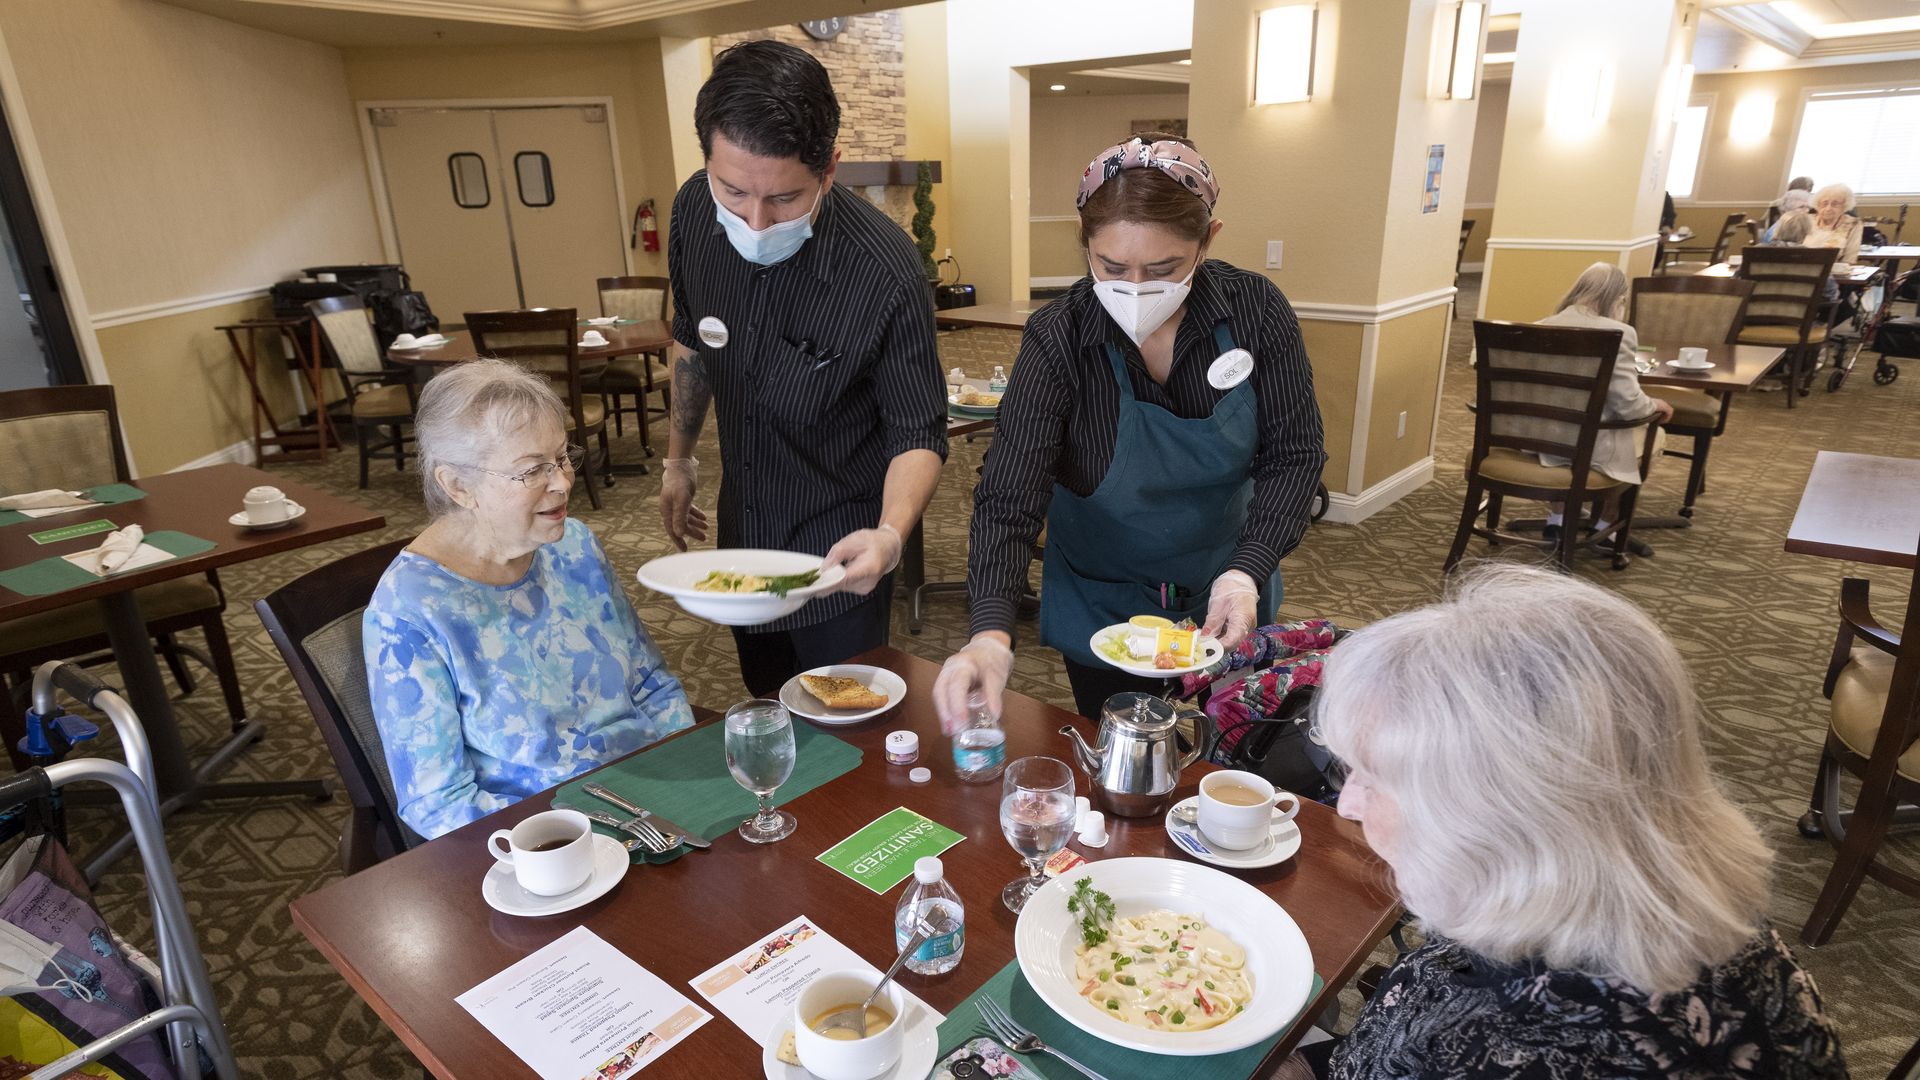 Two workers serve food to two elderly women at a senior living center.